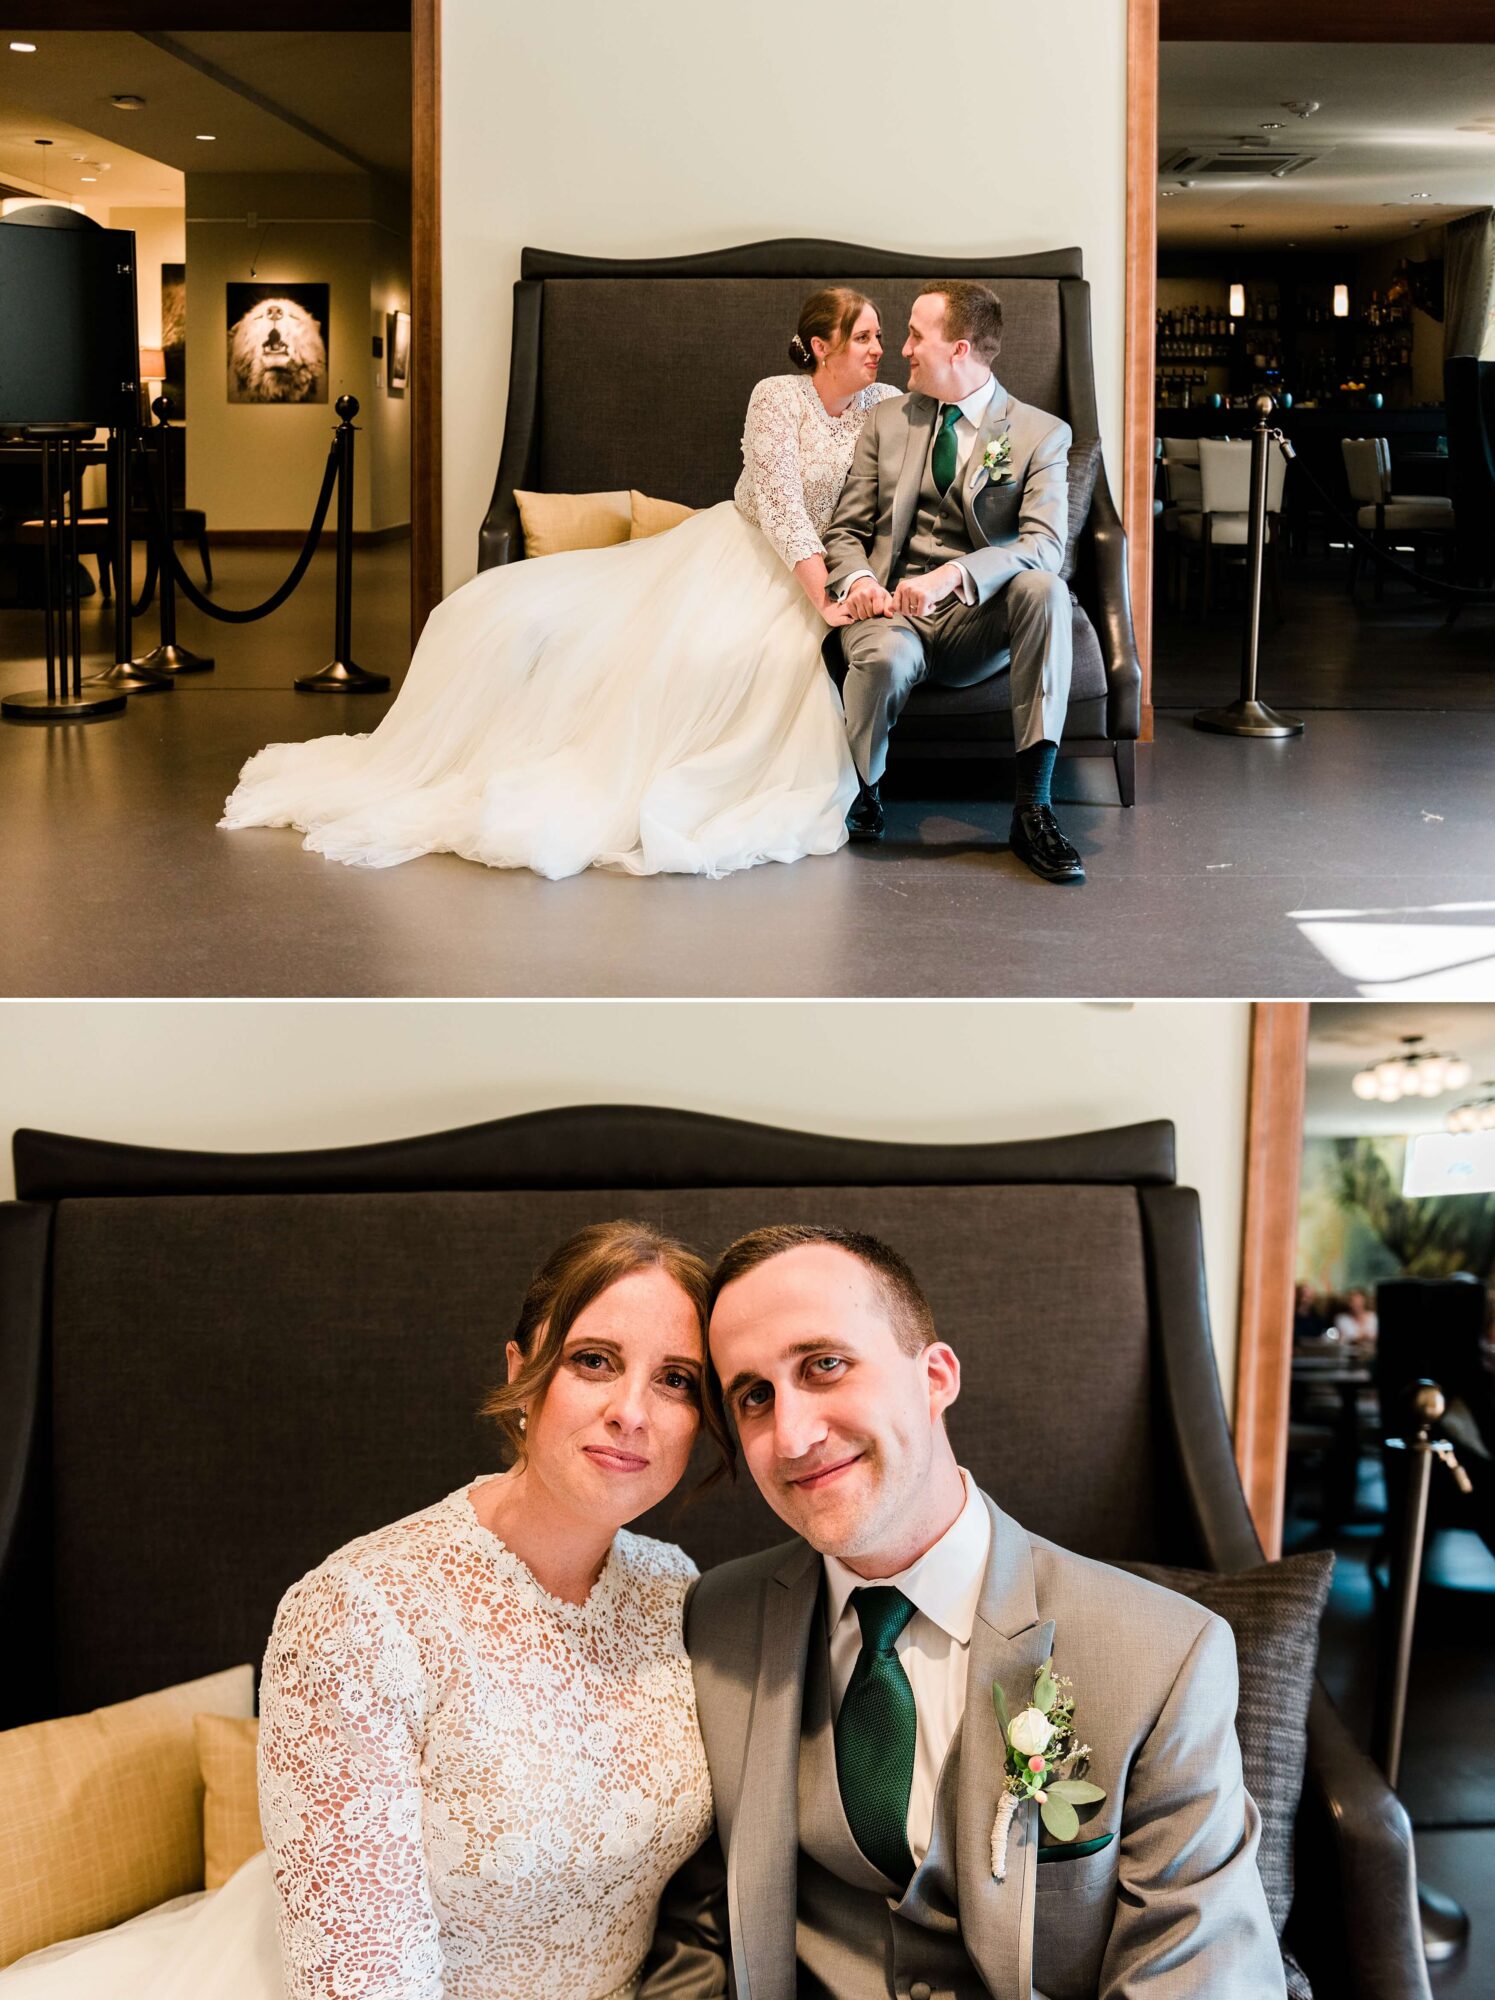 Stylish indoor portrait of the bride and groom at the Lodge at St. Edward Park